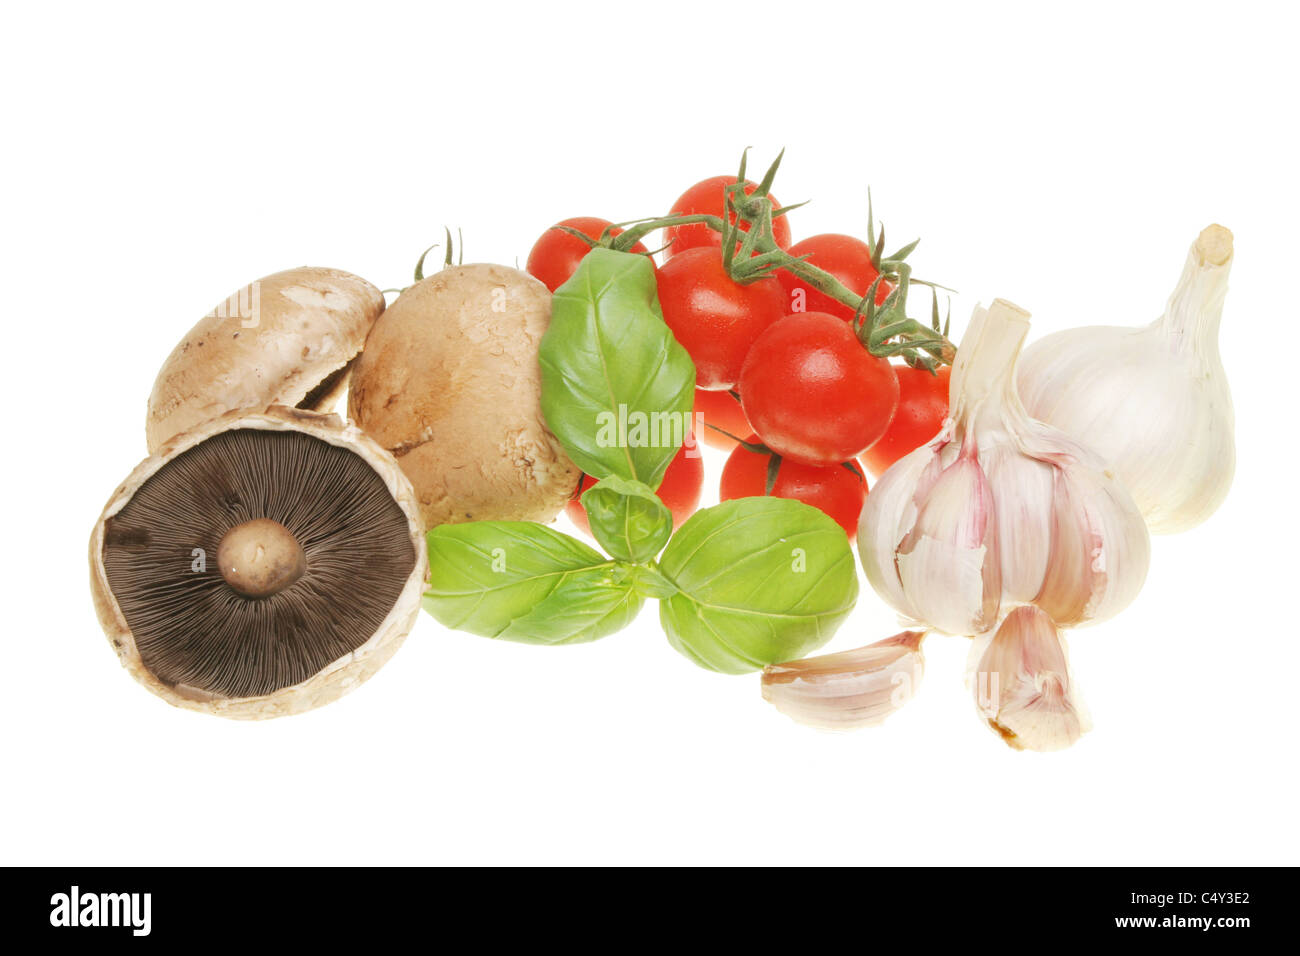 Complimentary food ingredients of mushrooms,basil,tomatoes and garlic isolated on white Stock Photo